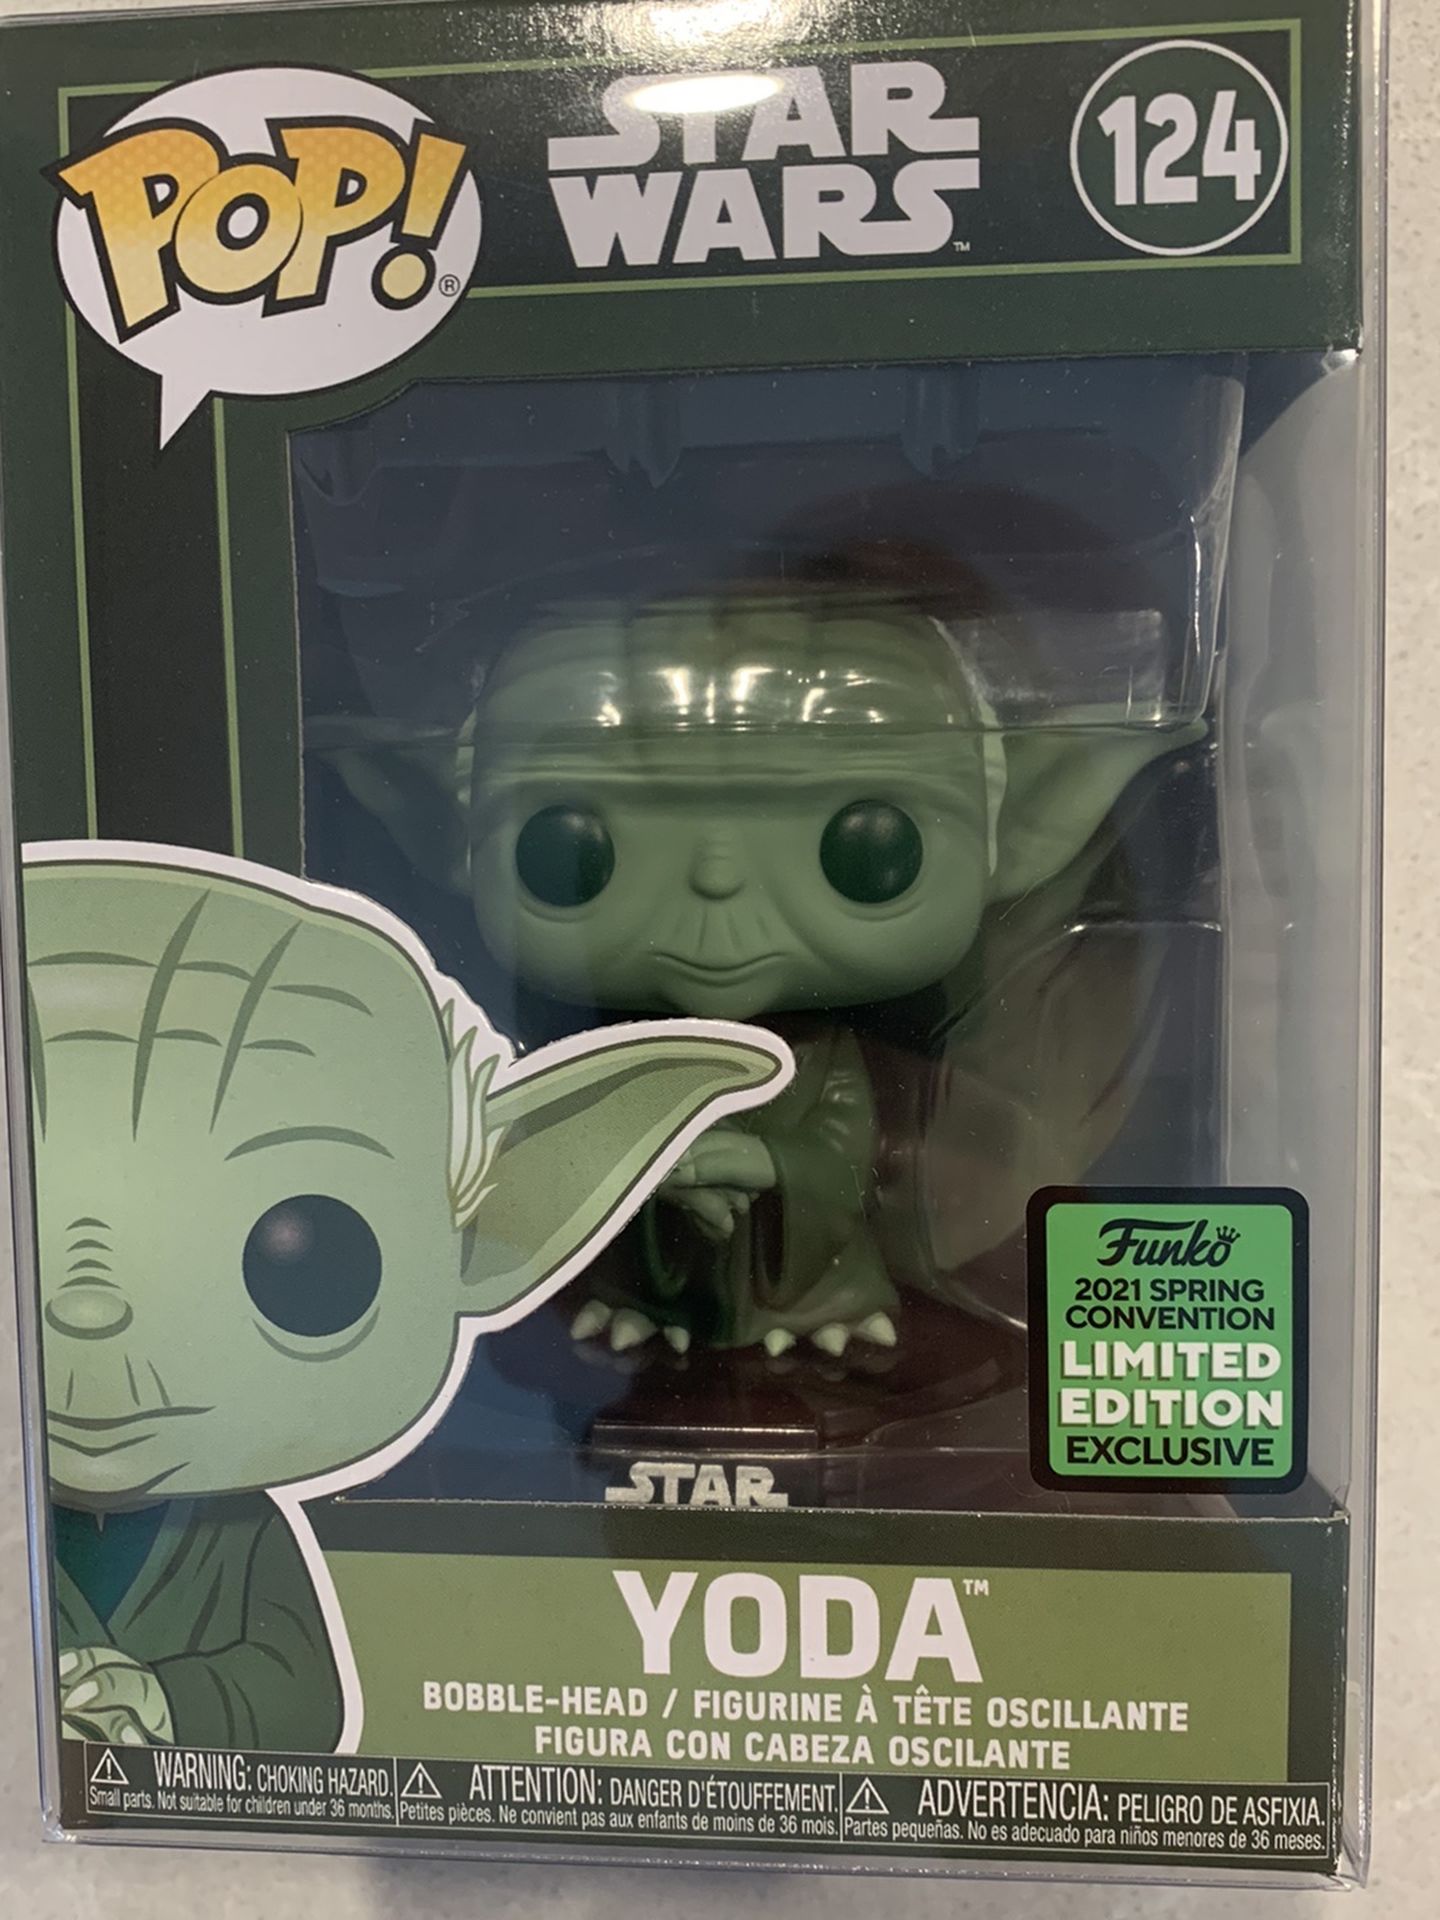 Yoda Funko Pop *MINT IN HAND* 2021 ECCC Spring Convention Target Exclusive Army Green Star Wars 124 with protector